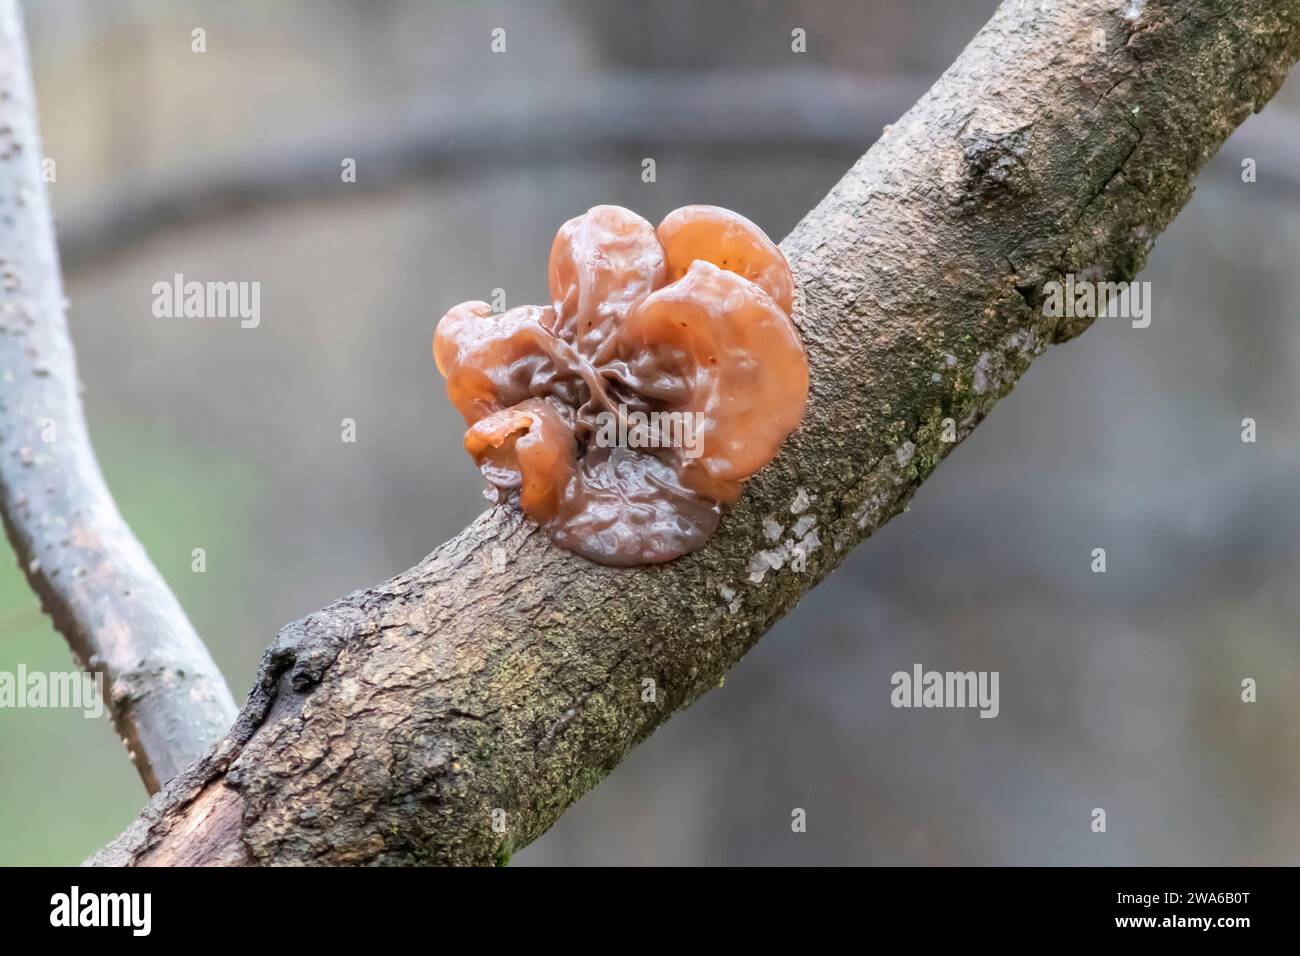 Close-up of a parasitic fungus leafy brain  (Phaeotremella foliacea) growing on a thin dead branch in winter Stock Photo